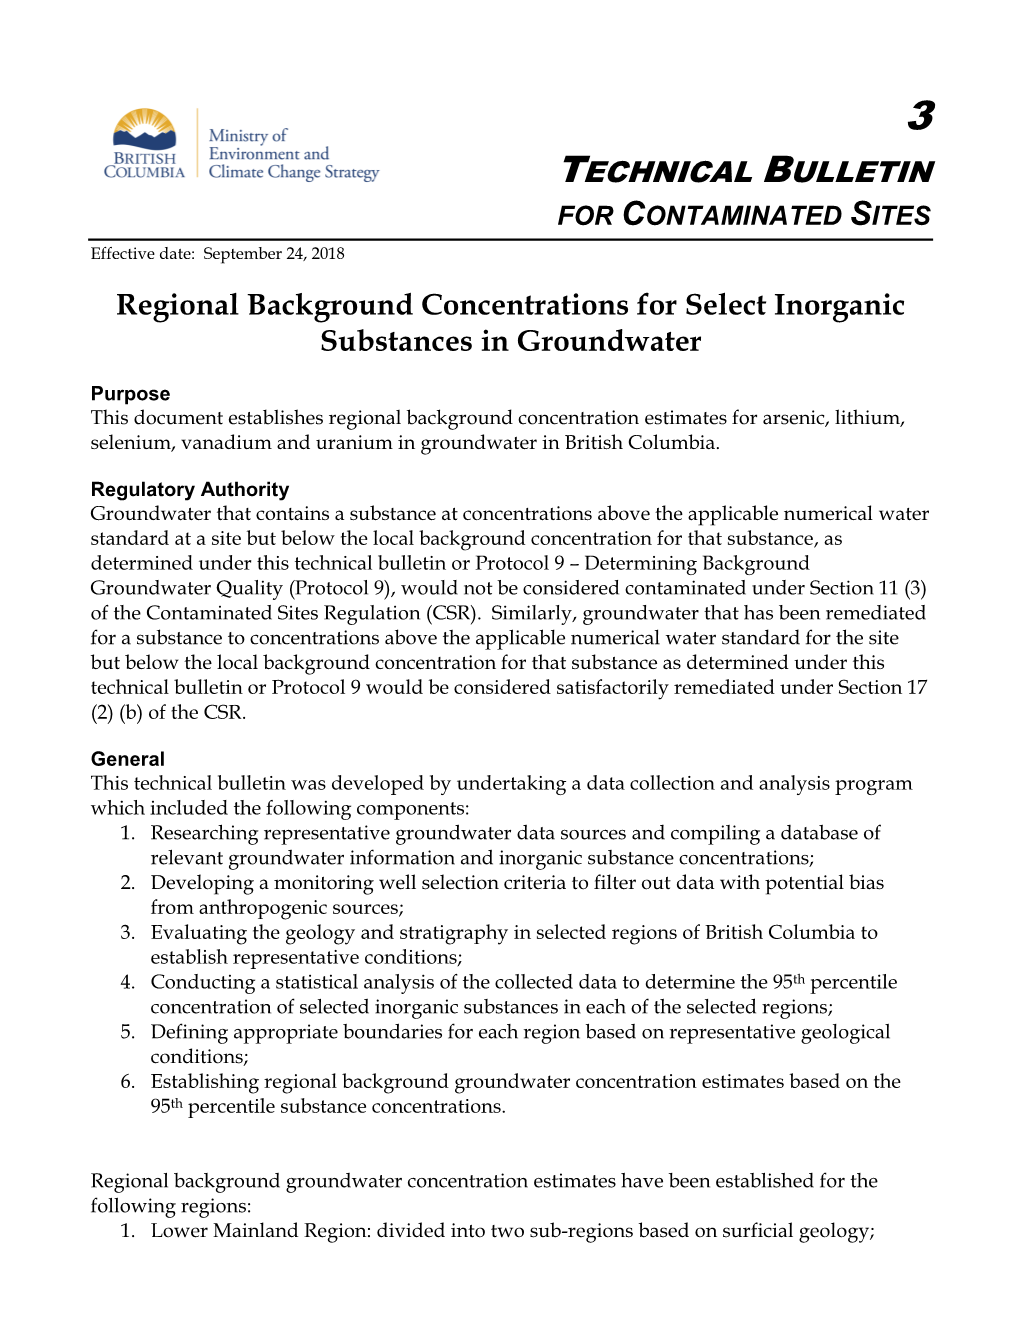 Technical Bulletin #3 – Regional Background Concentrations For